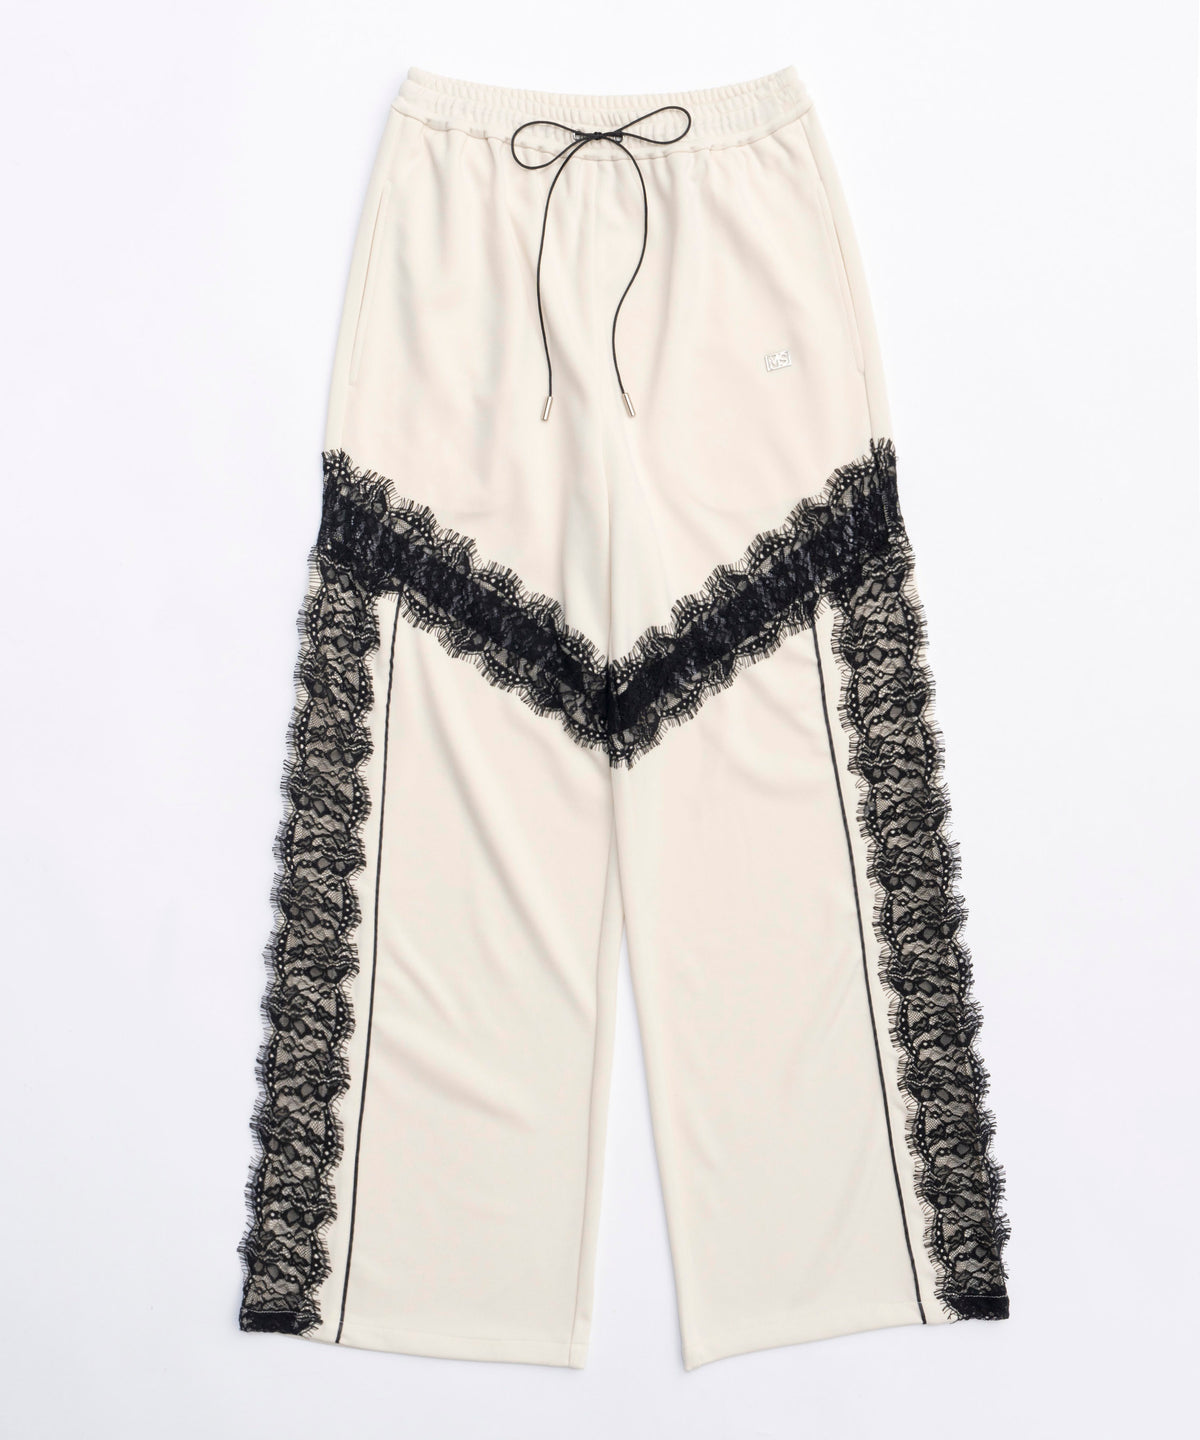 【PRE-ORDER】Lace Docking Jersey Pants